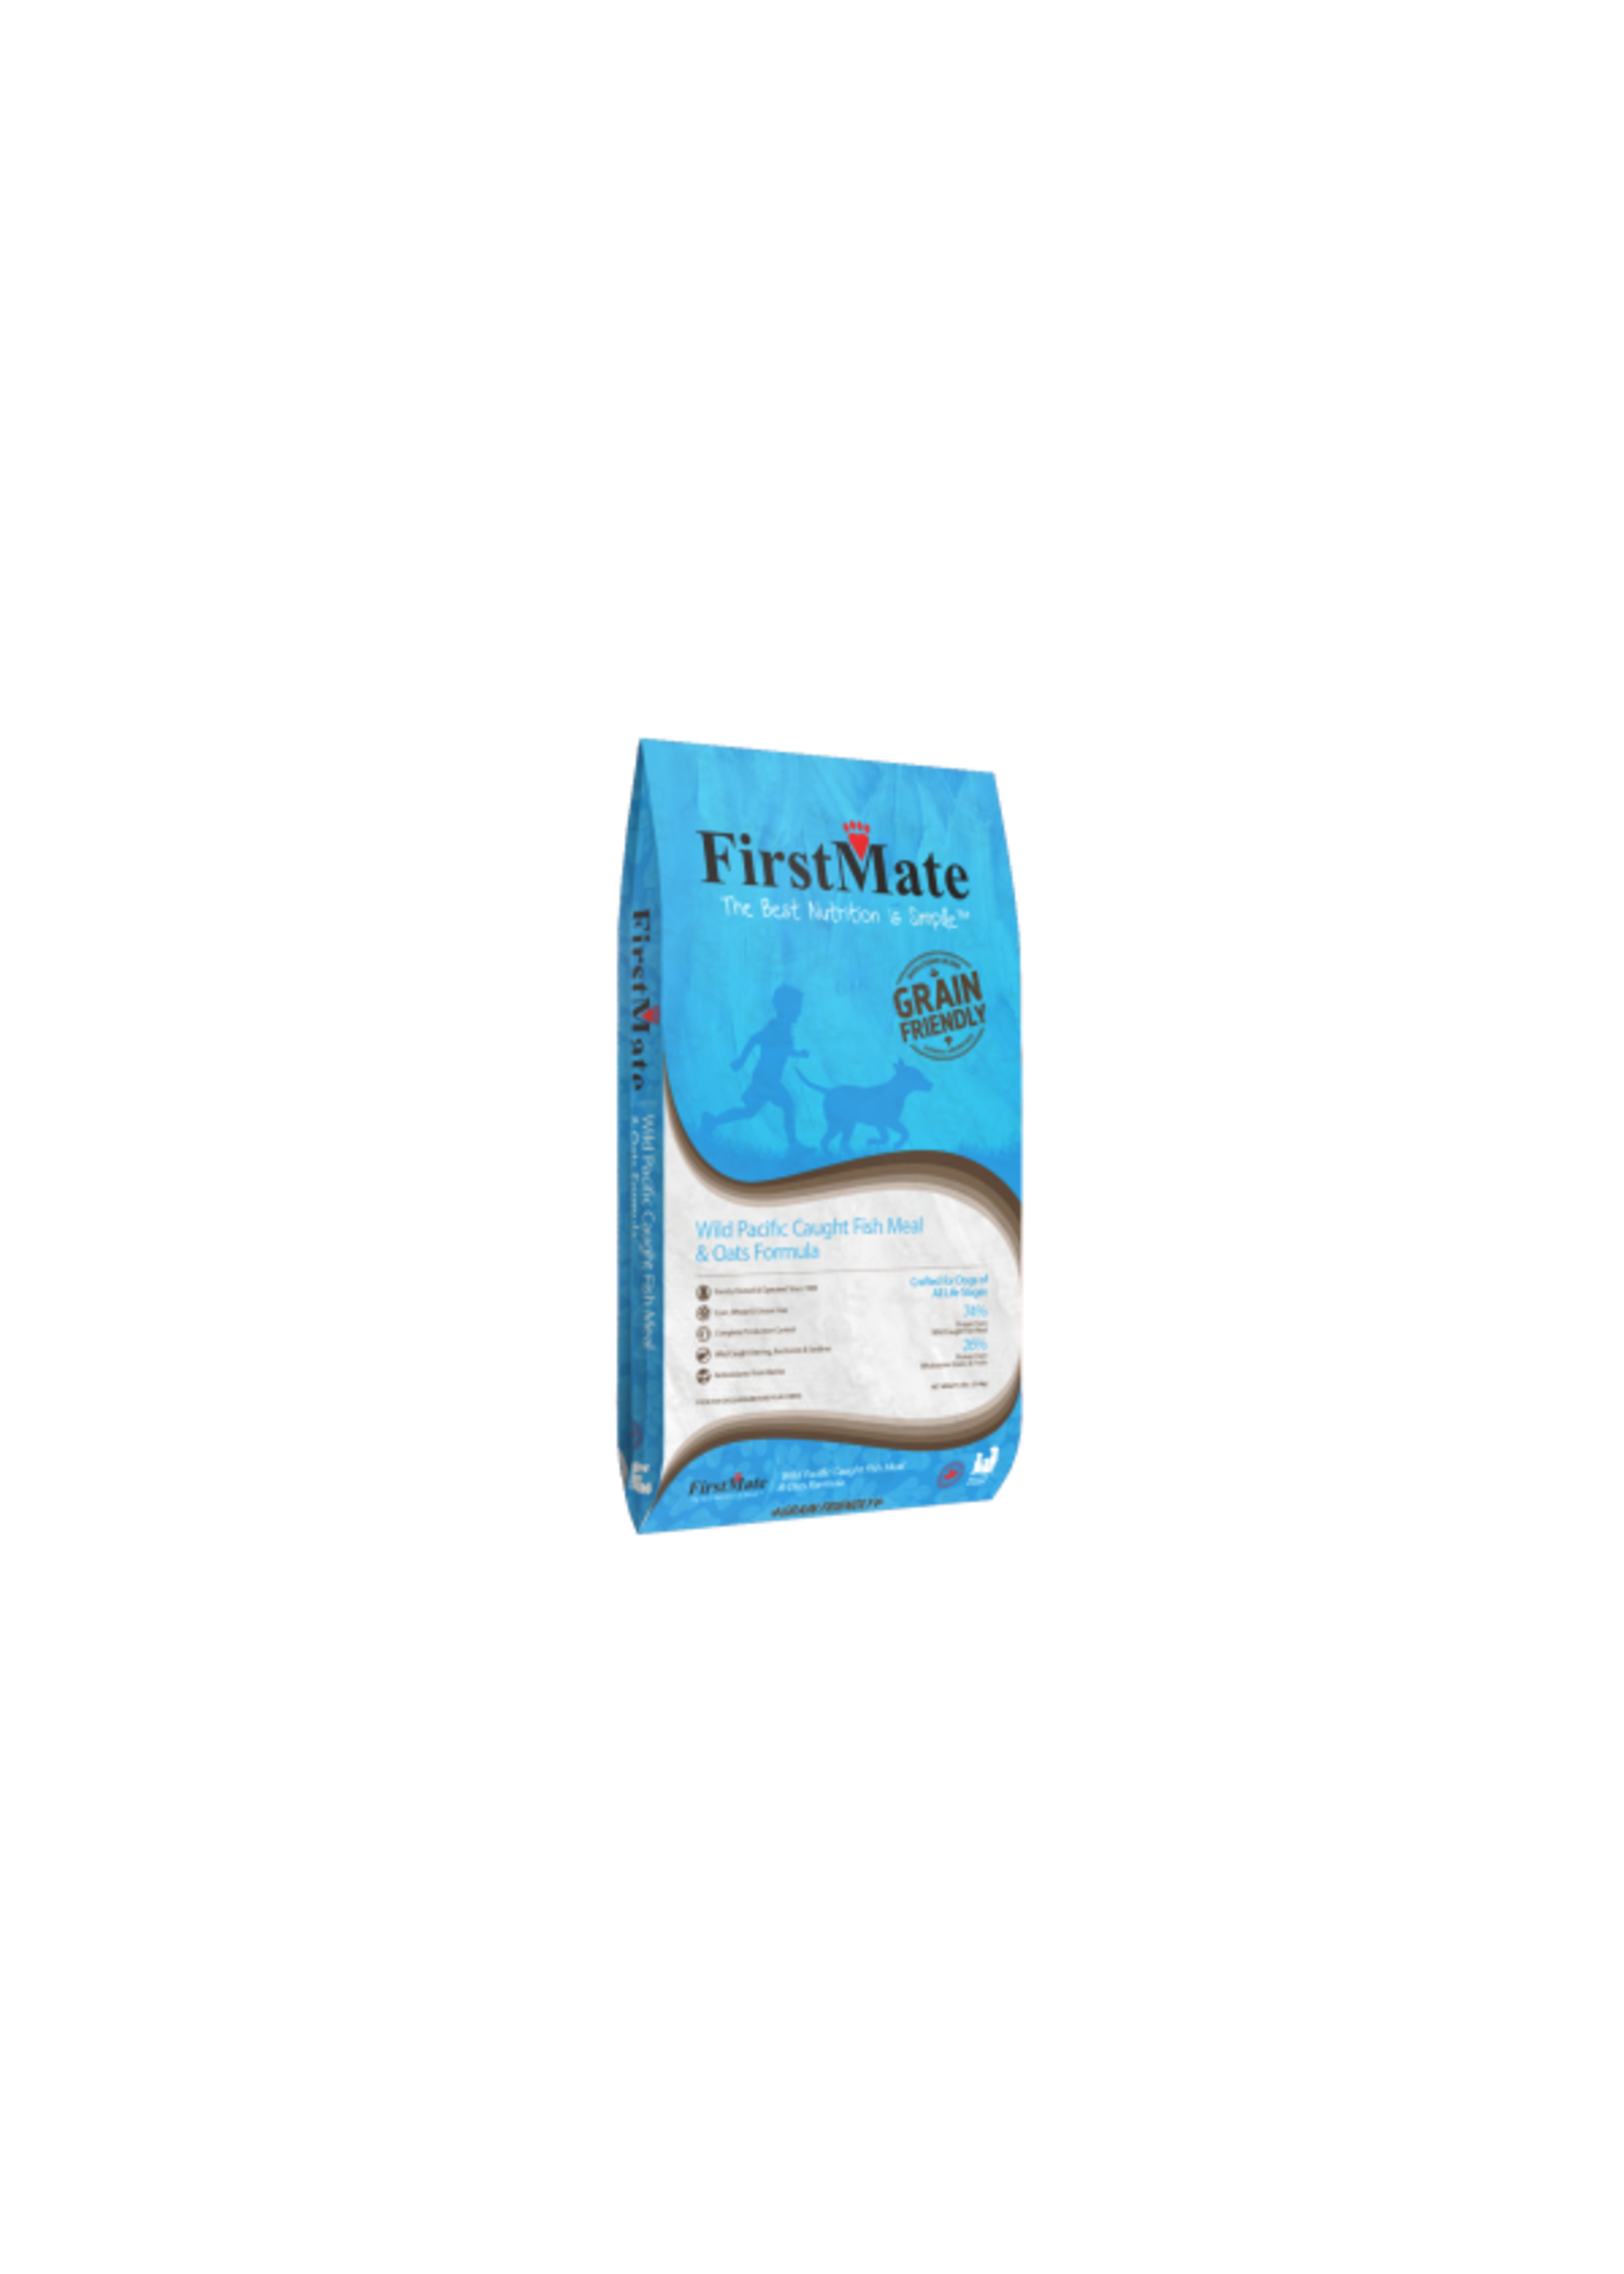 Firstmate FirstMate - Grain friendly Wild Pacific Fish & Oats Dog